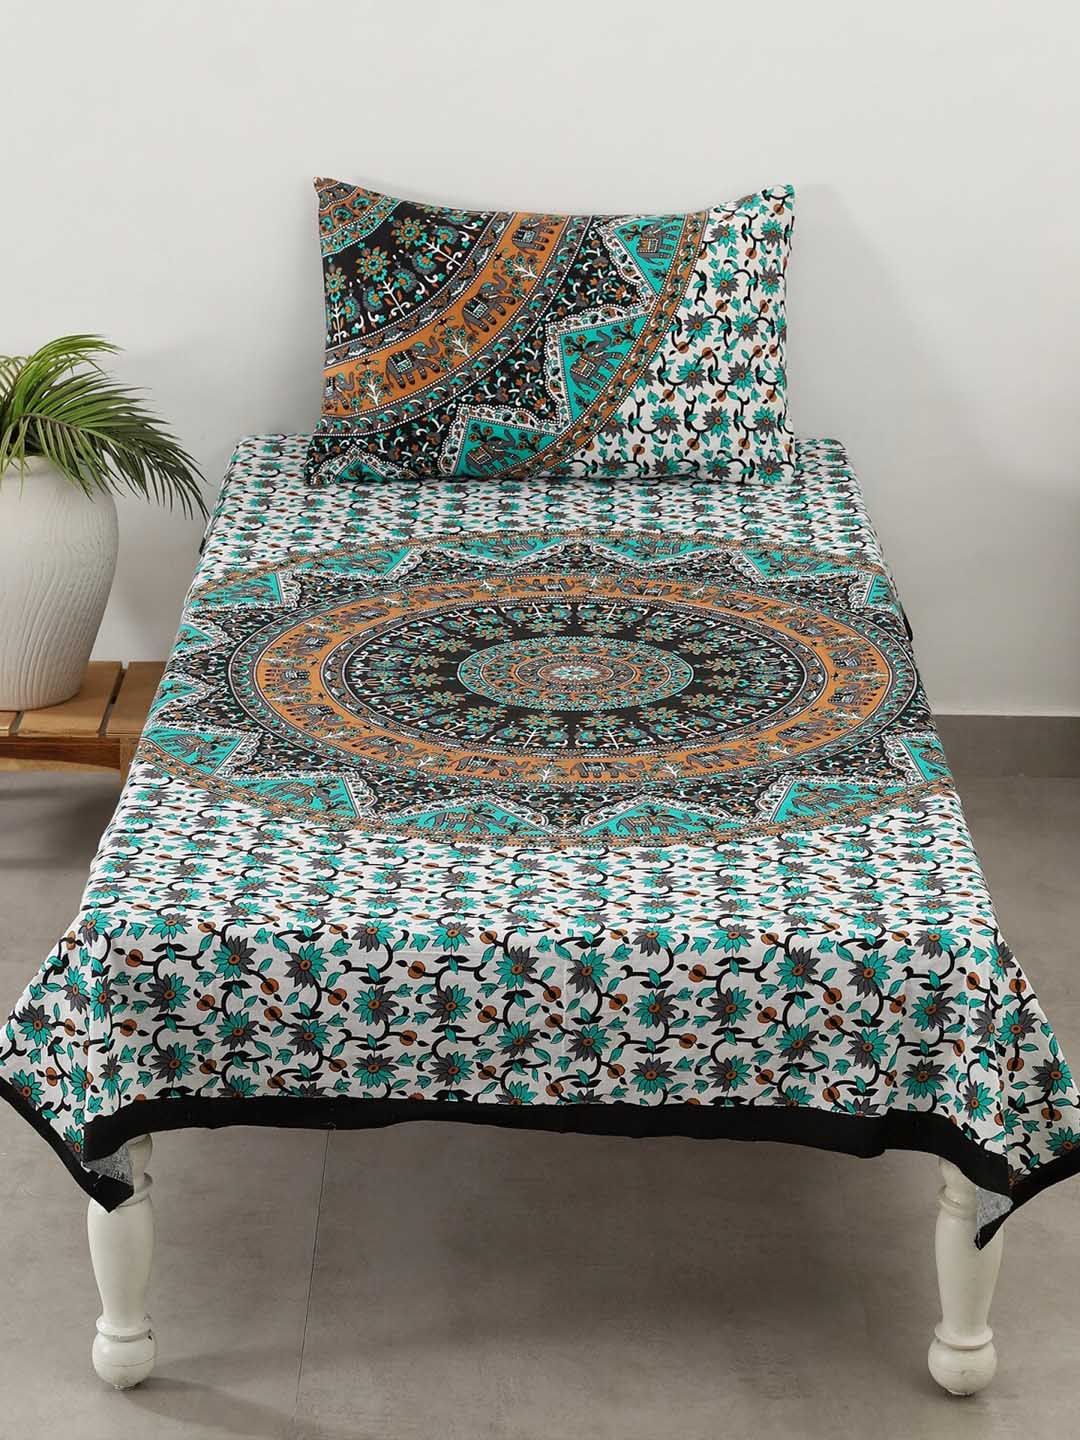 HANDICRAFT PALACE Green 144 TC Elephant Mandala Cotton Single Bedsheet With 1 Pillow Cover Price in India